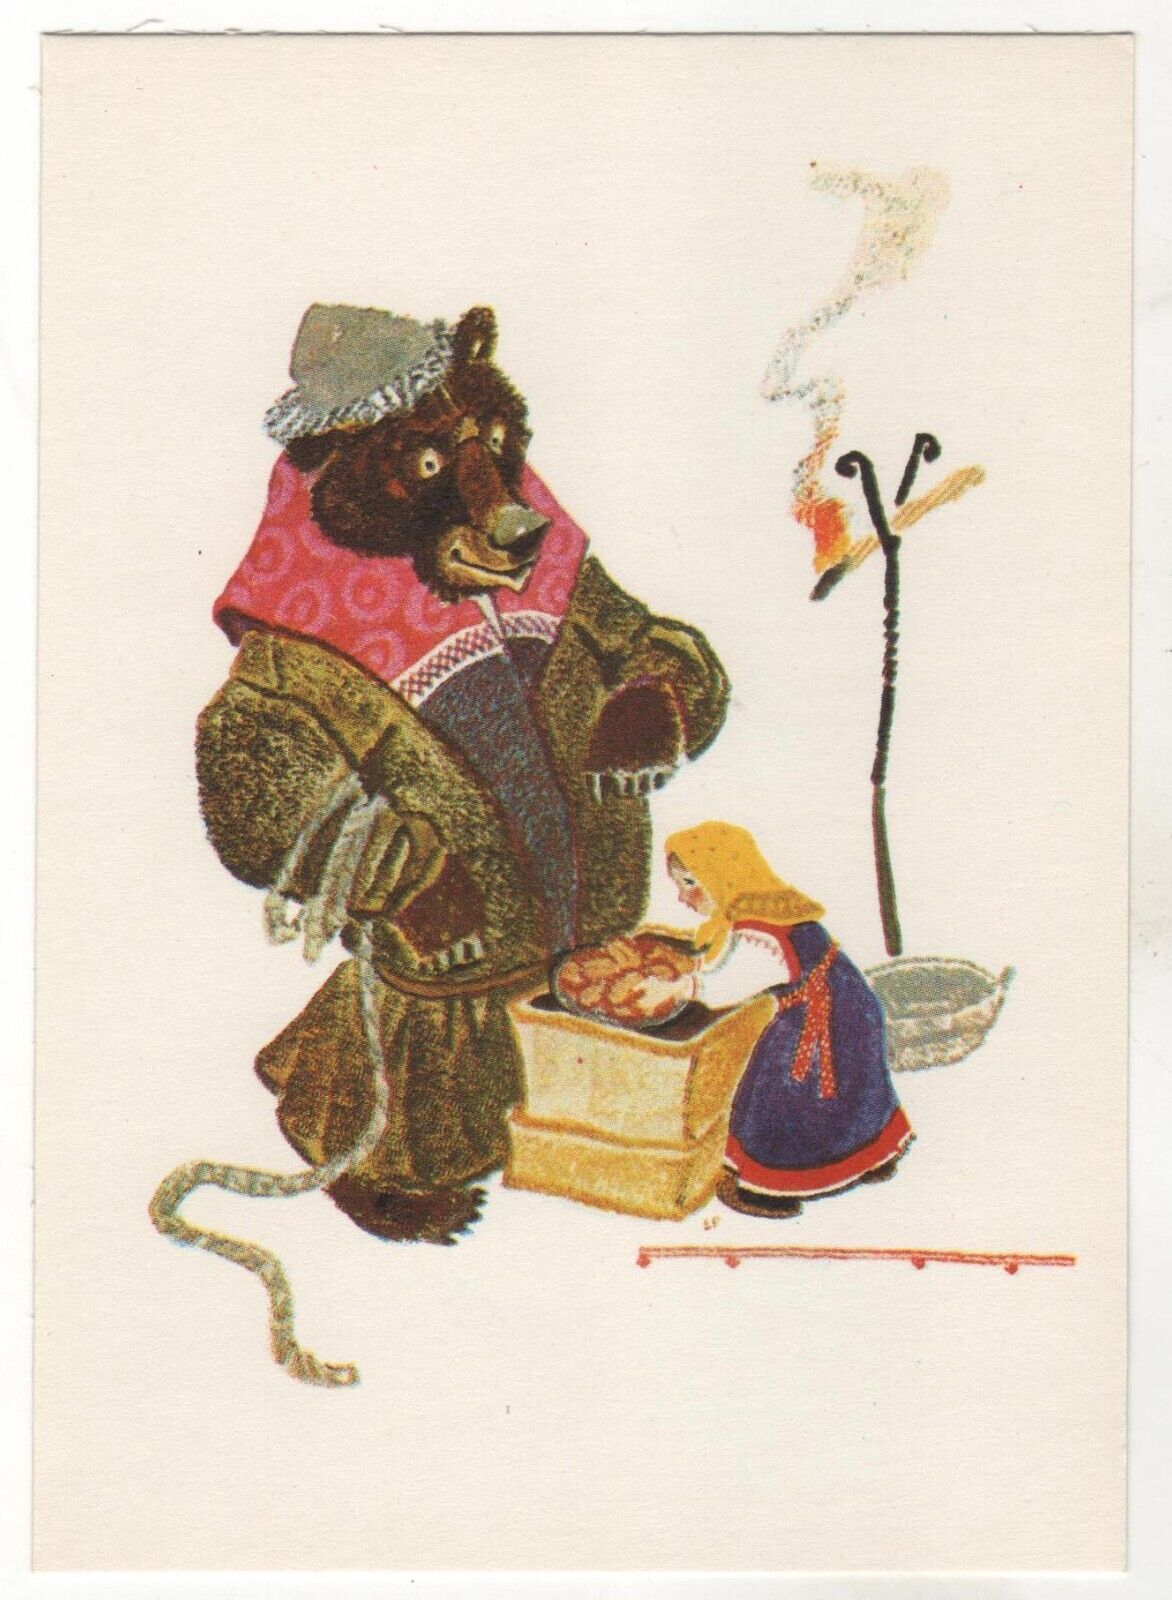 1975 Fairy Tale GIRL & Bear in Dressed Present pies Soviet RUSSIAN POSTCARD Old